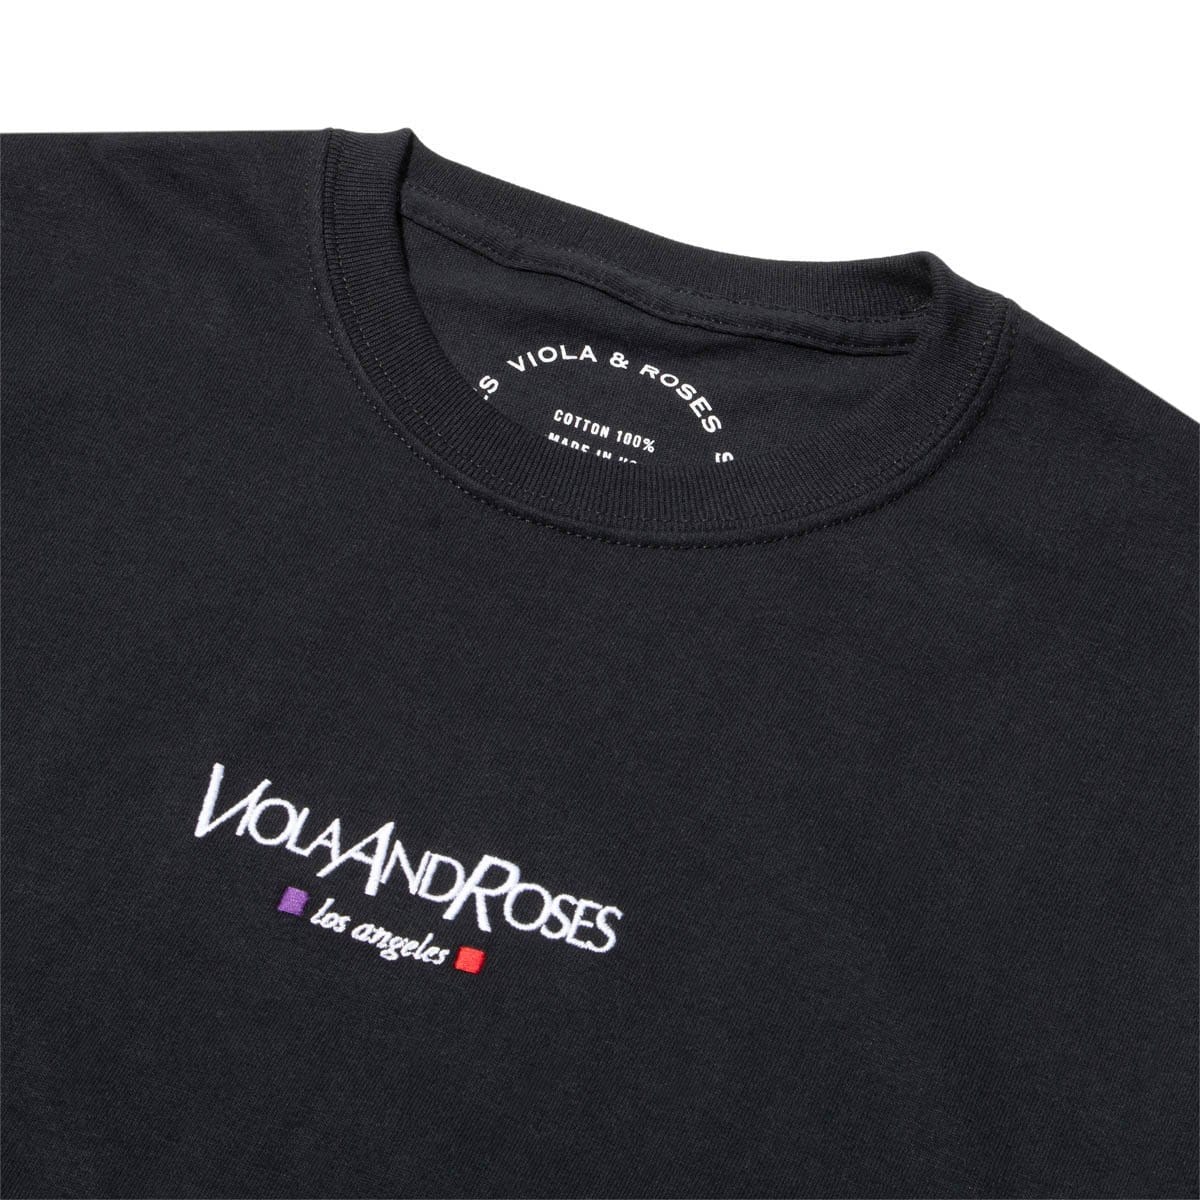 Viola and Roses T-Shirts VAR21 S/S TEE